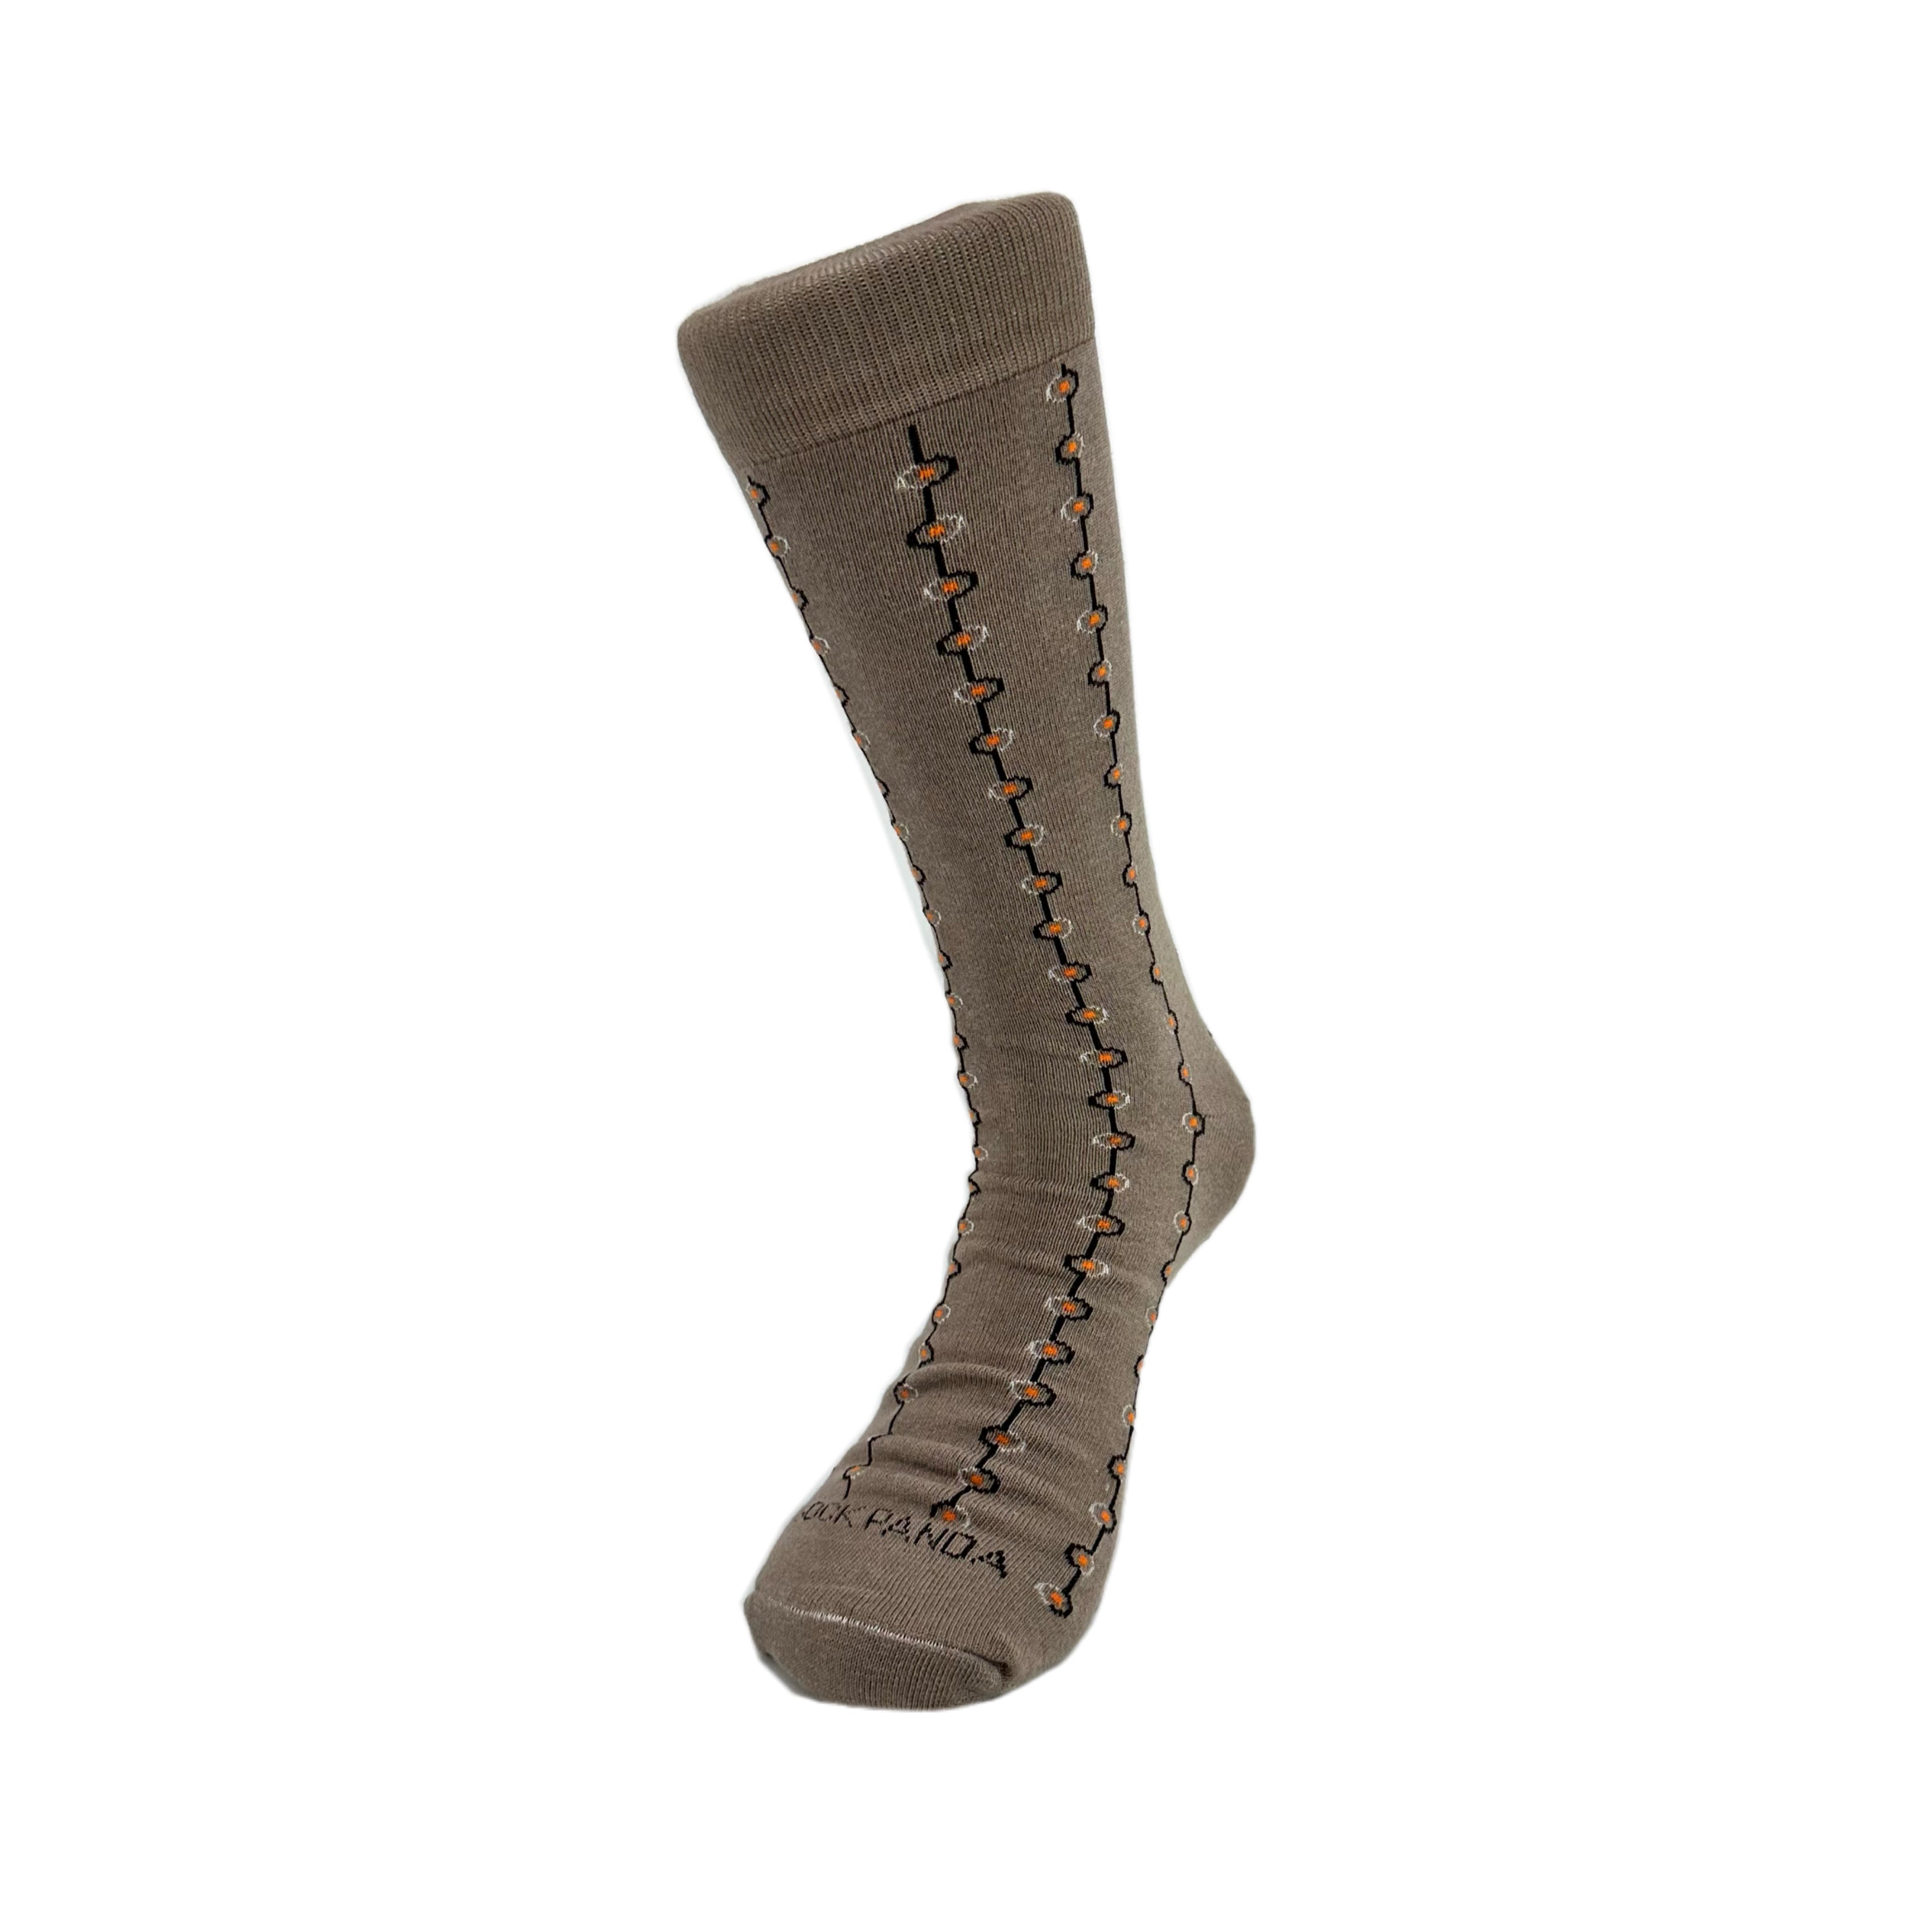 Classy Brown Patterned Socks from the Sock Panda (Adult Large)